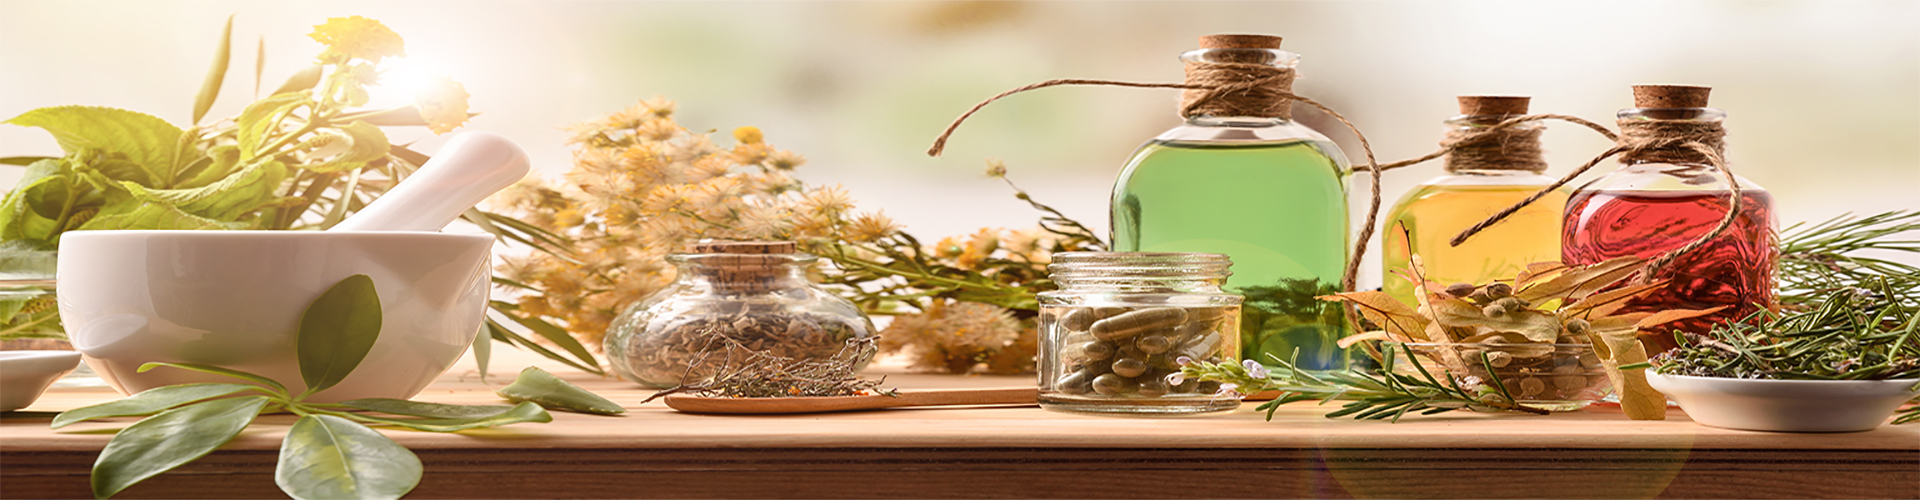 Composition of natural alternative medicine with capsules, essence and plants on wooden table in rustic kitchen. Front view. Horizontal composition.